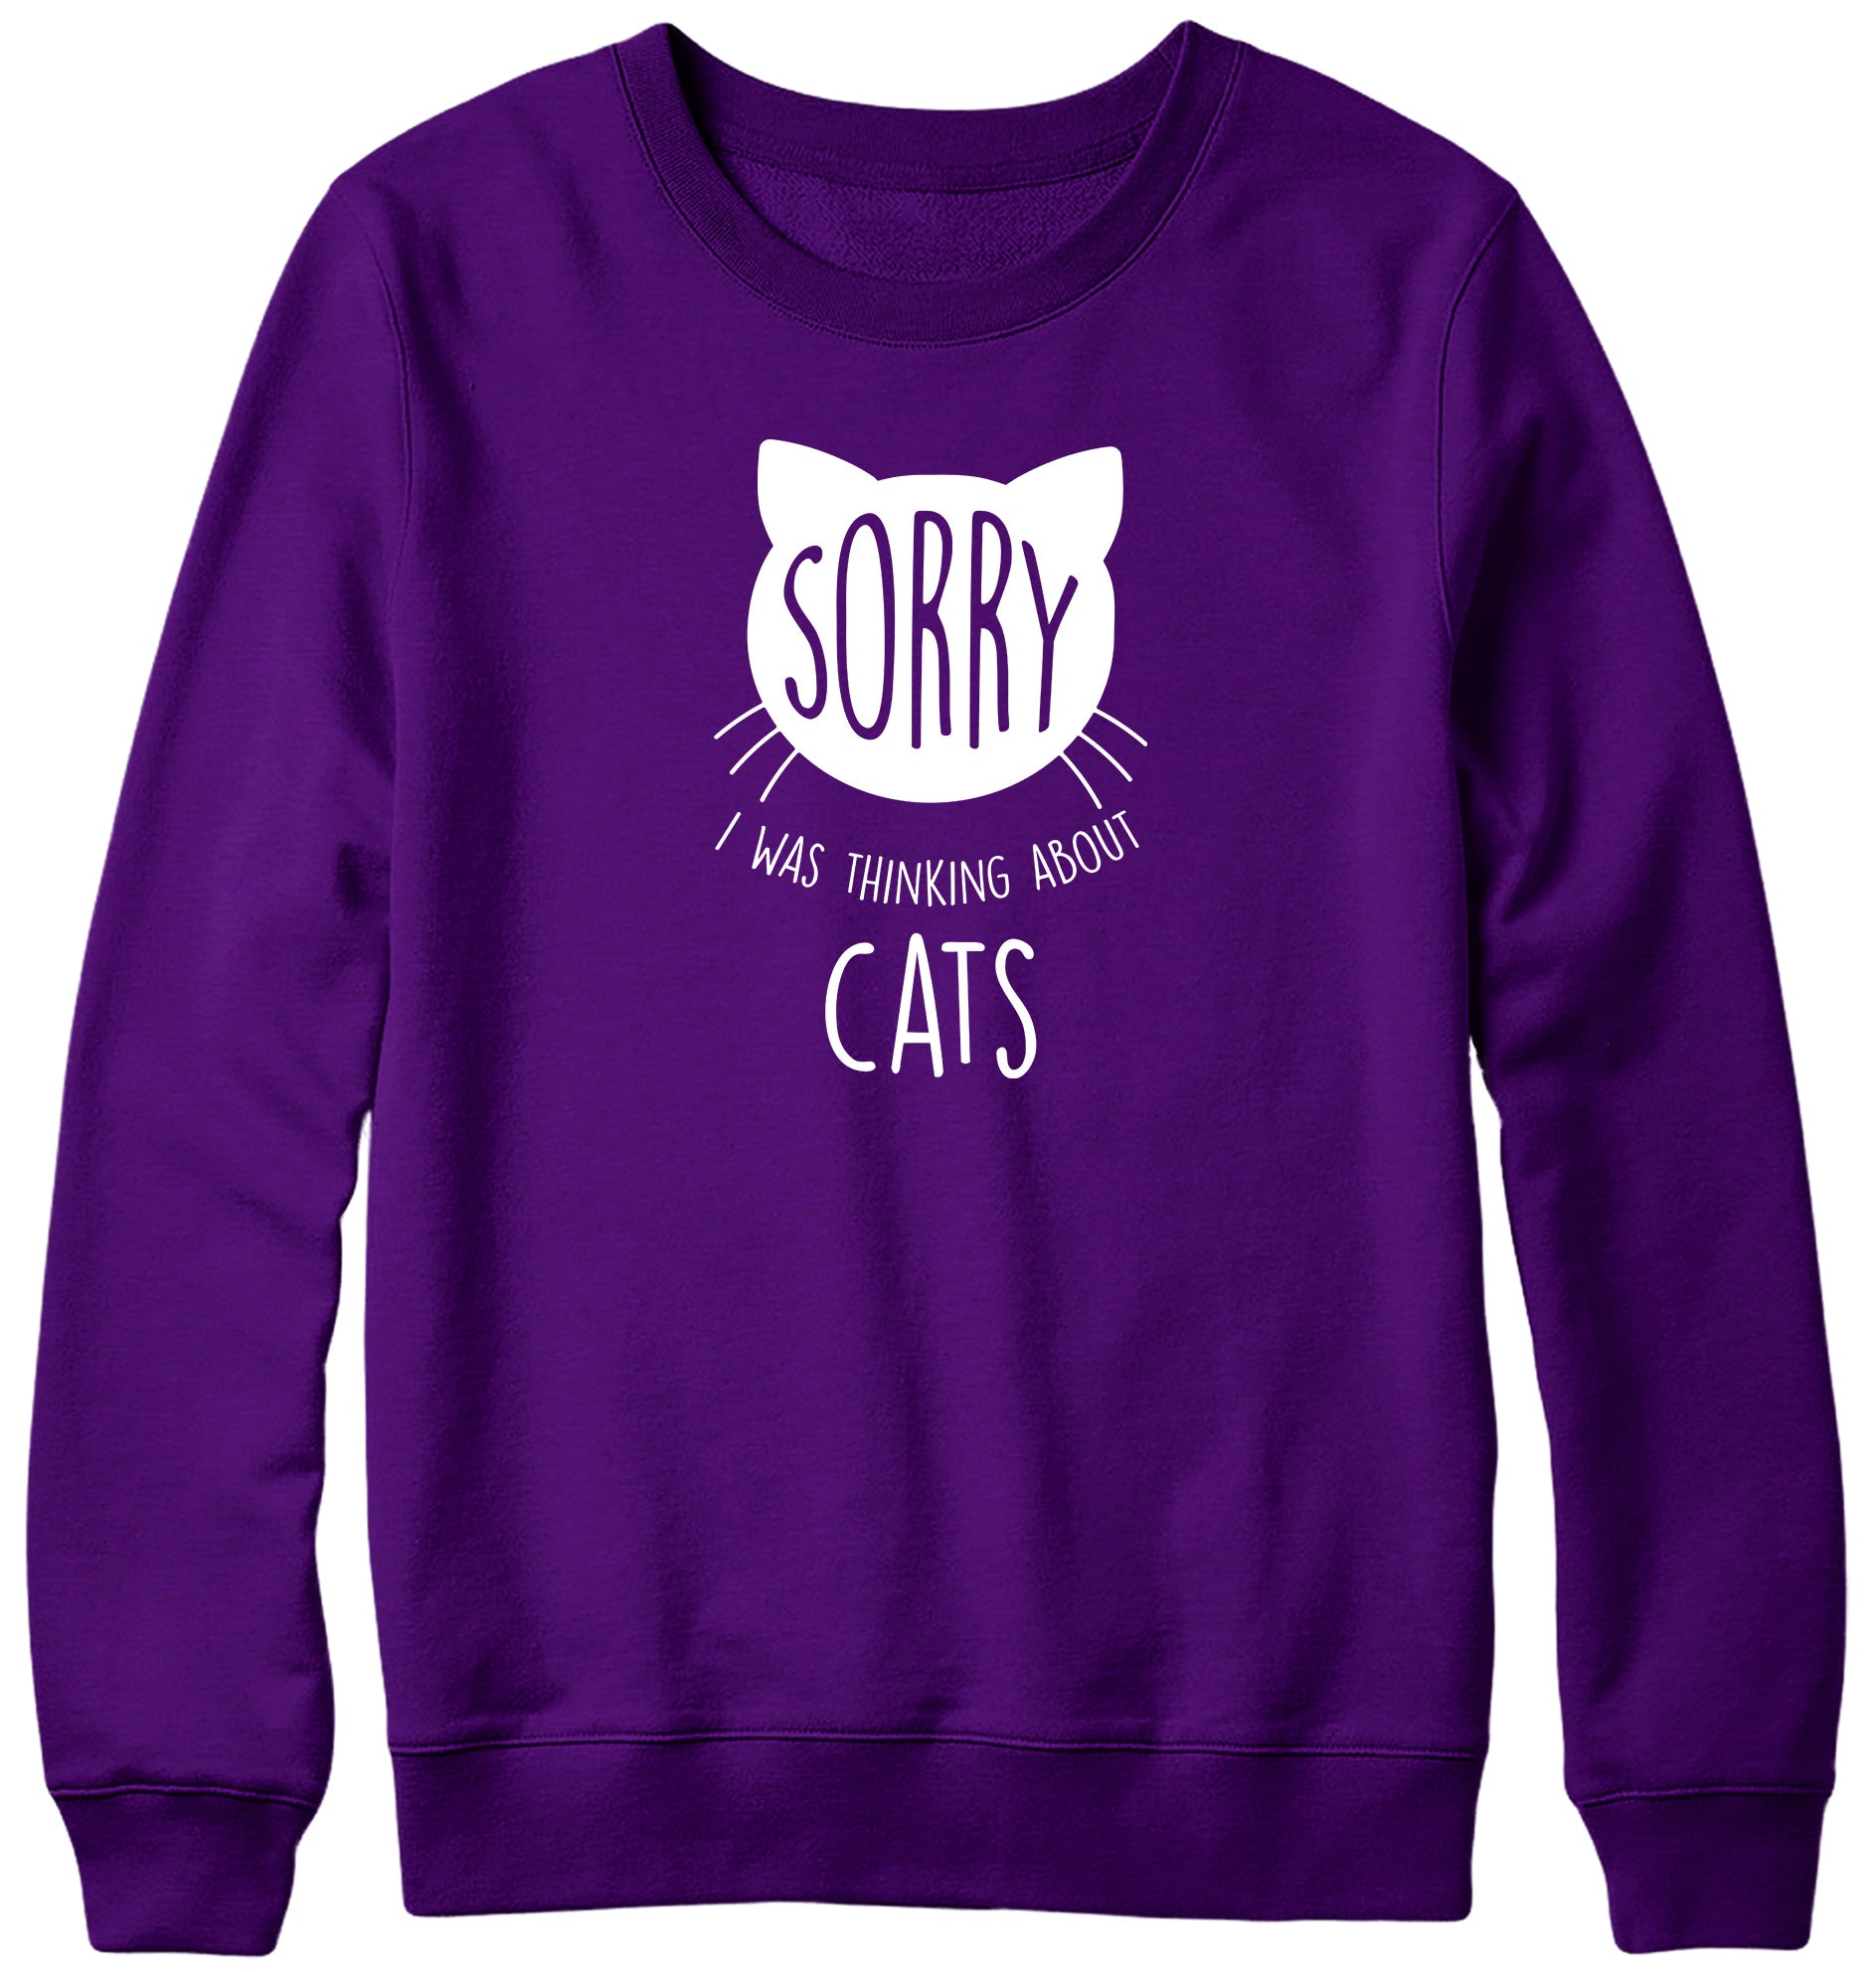 SORRY  I WAS THINKING ABOUT CATS MENS LADIES WOMENS UNISEX SWEATSHIRT SWEATER